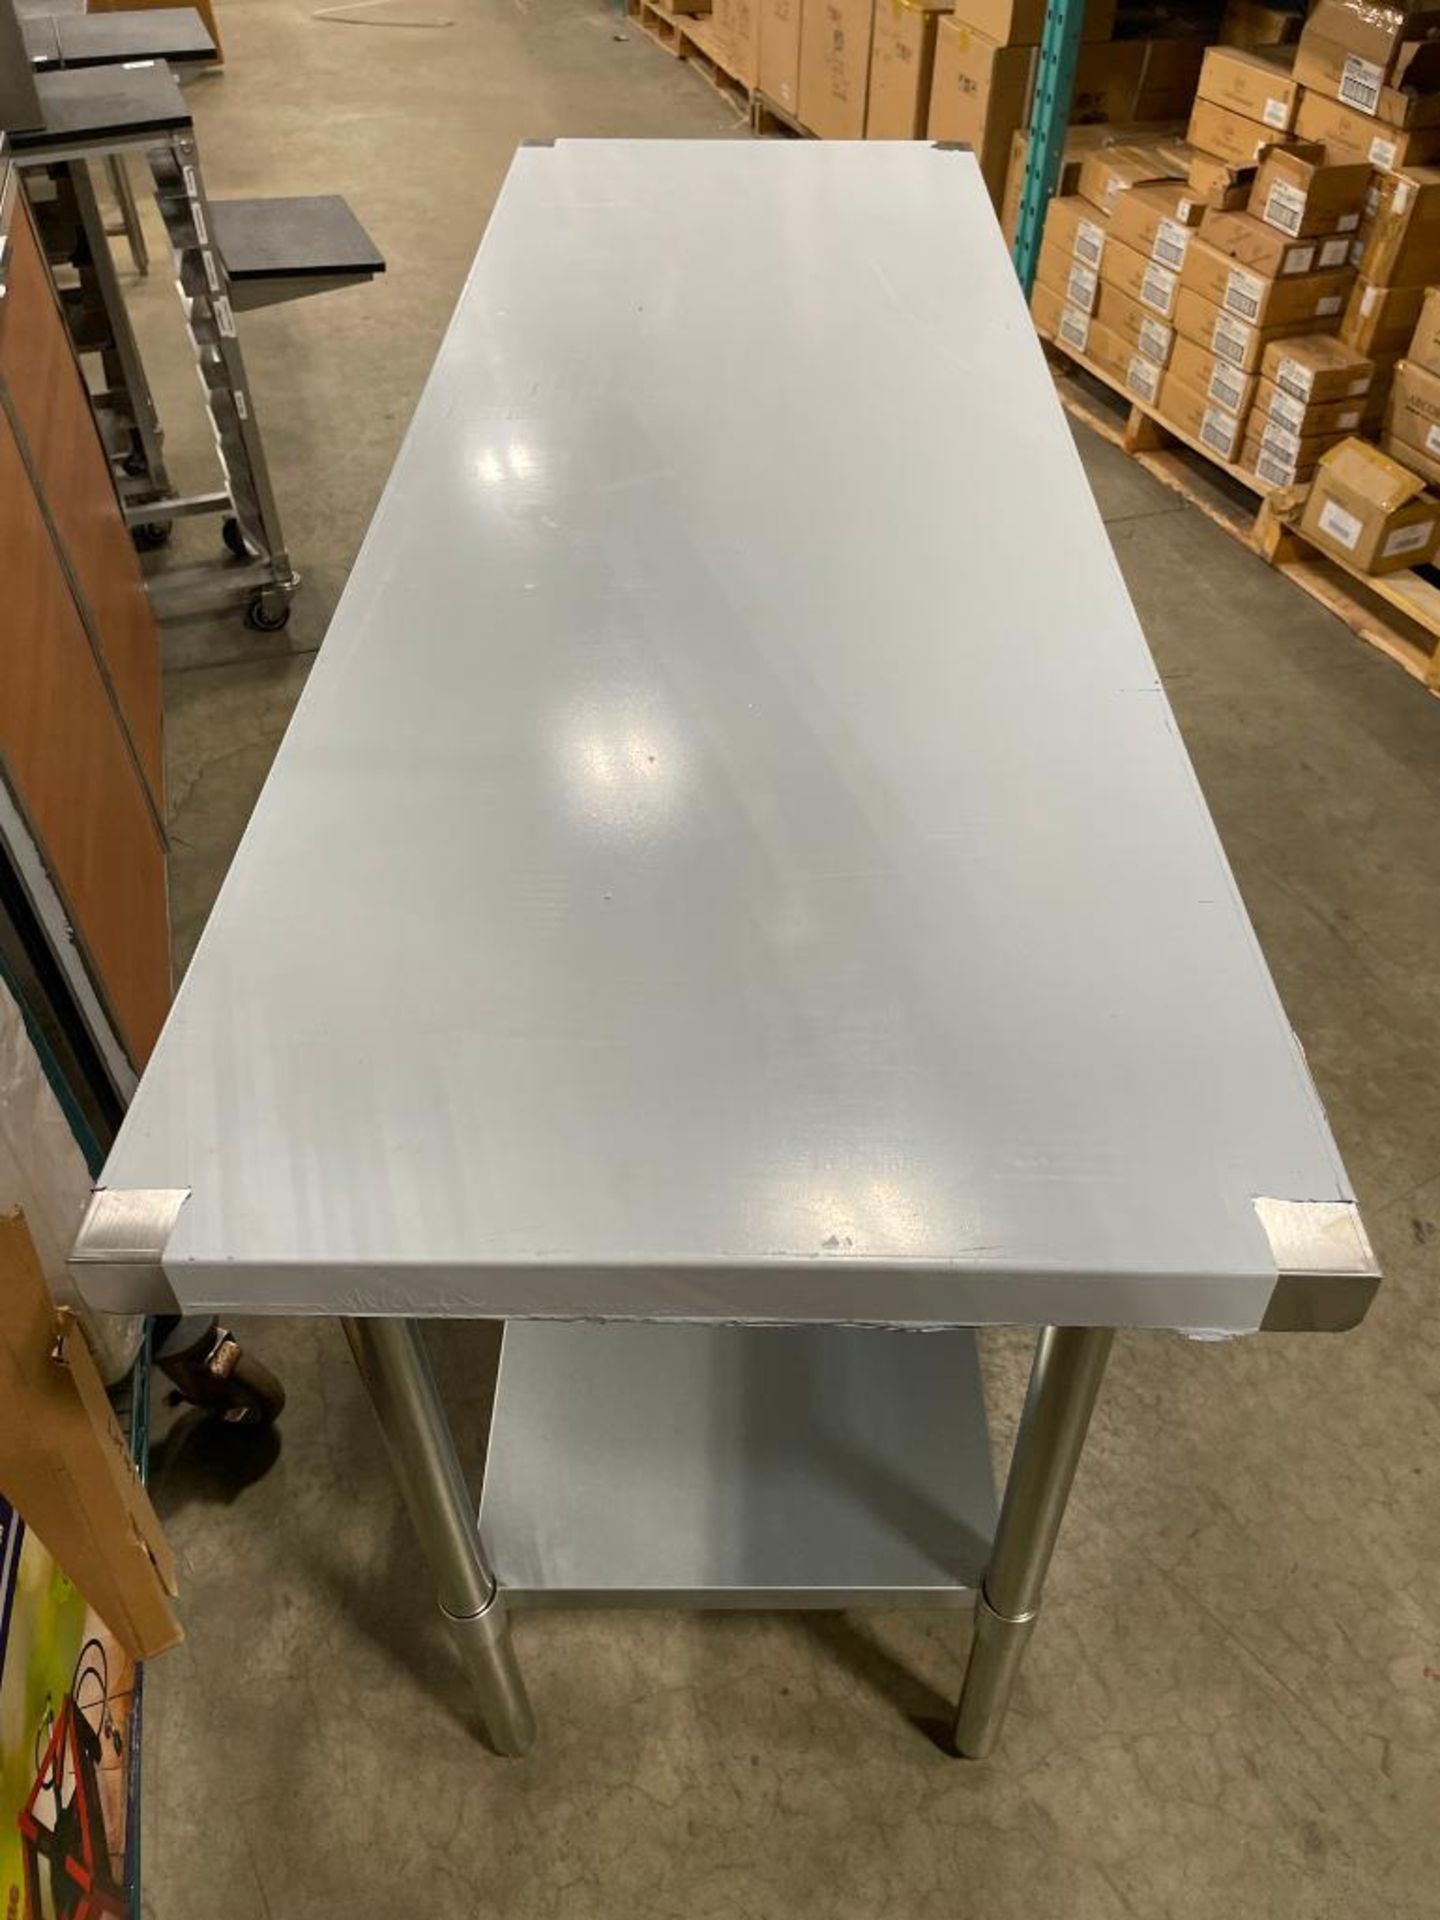 NEW 72" X 30" STAINLESS STEEL WORK TABLE - Image 2 of 4